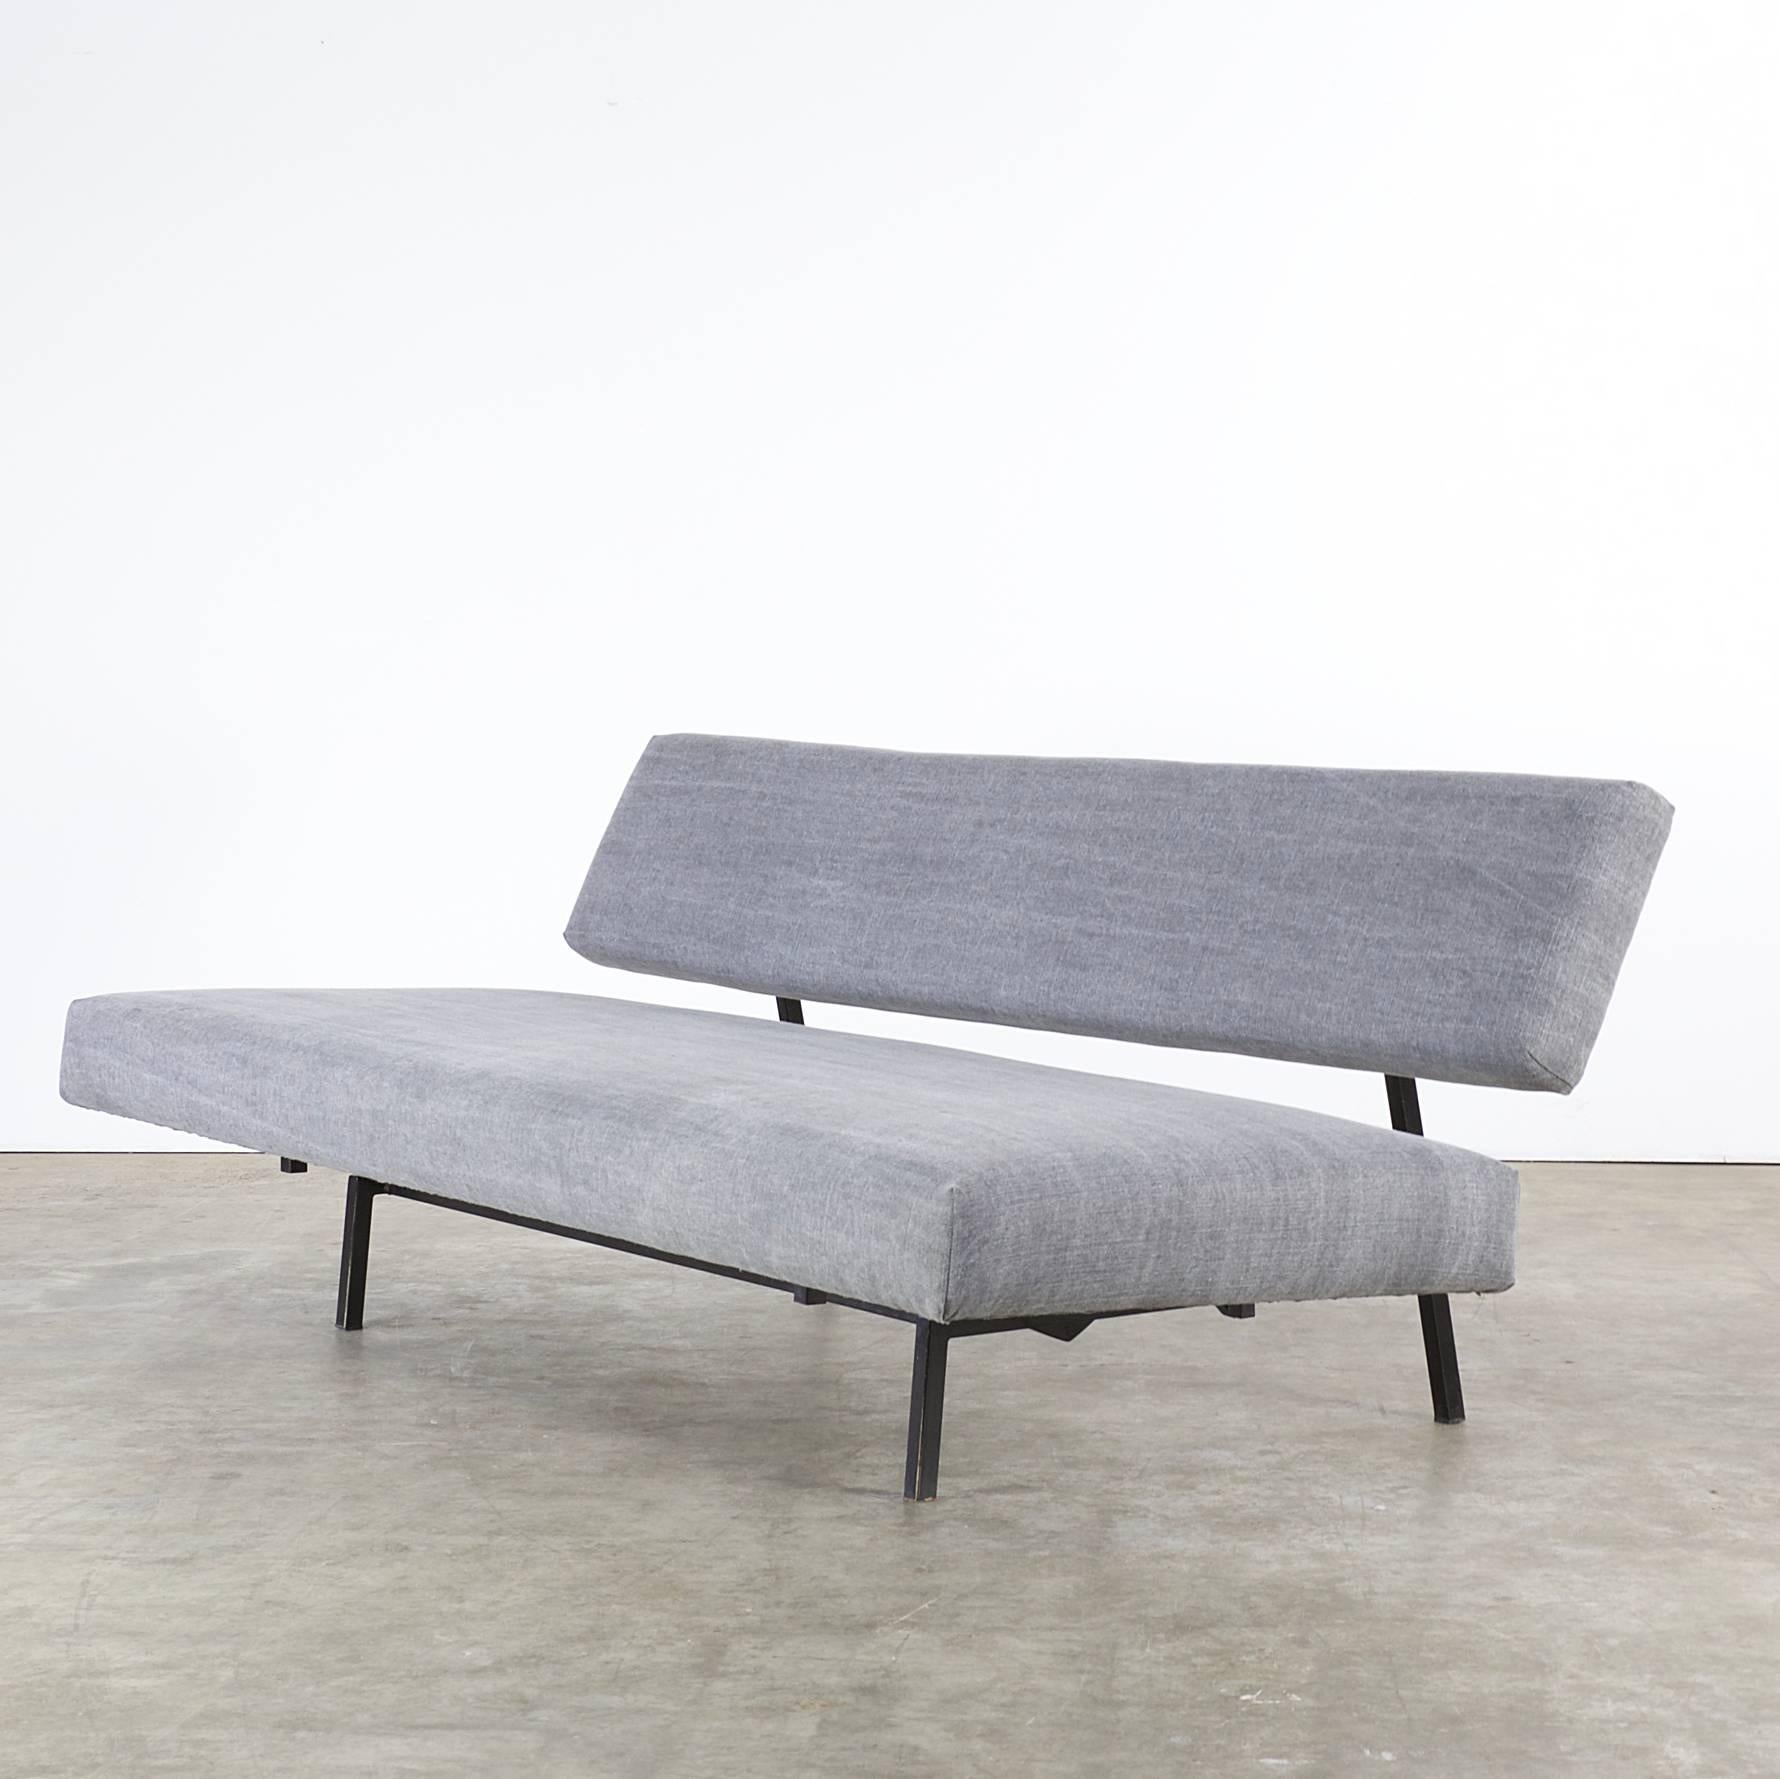 1960s Martin Visser sofa or daybed ‘BR03' for ’t Spectrum. New upholstery. Grey fabric. Metal frame. Good condition, wear consistent with age and use. Dimensions: 195cm (W) x 80-95cm(D) x 73cm(H), seat: 38cm.